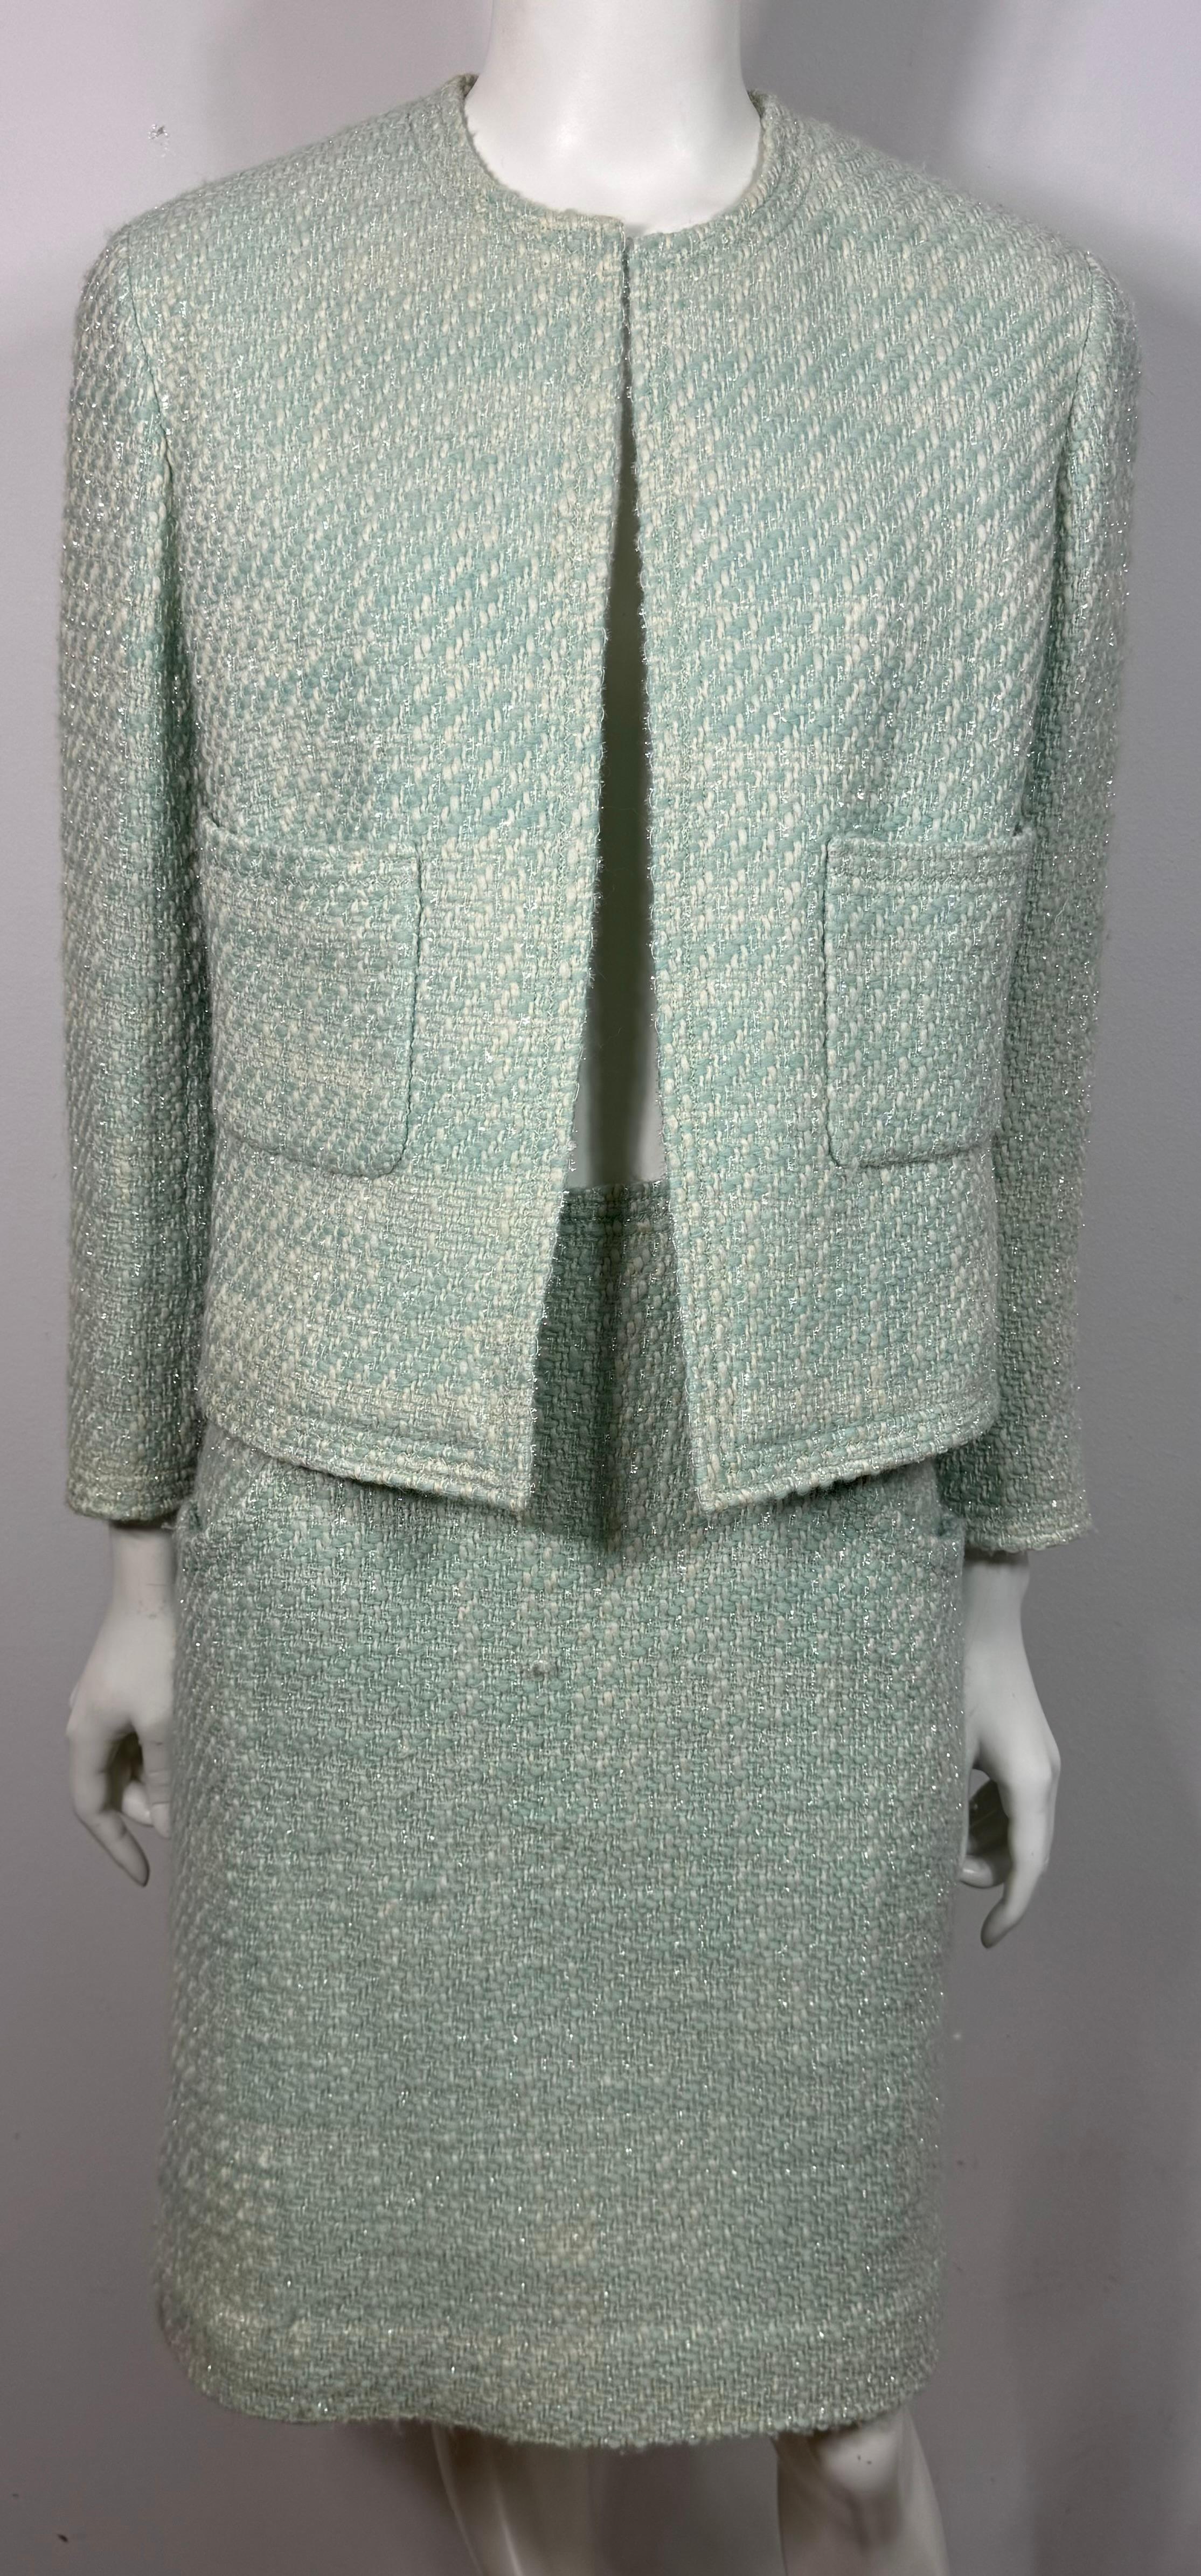 Chanel Boutique Runway Spring 1992 Ivory and Turq Tweed Jacket For Sale 10